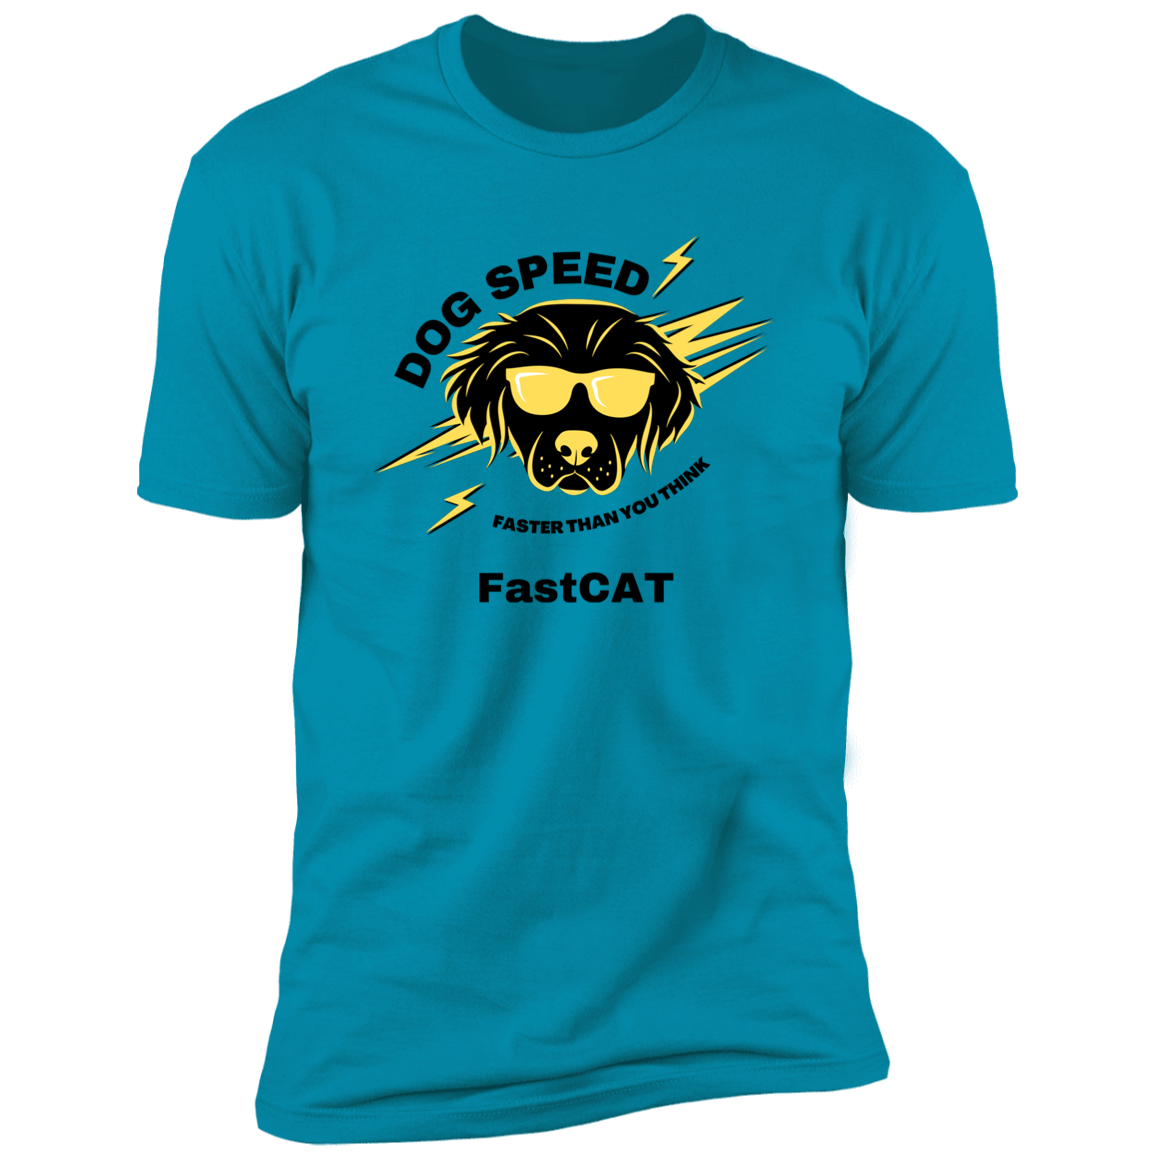 Dog Speed Faster Than You Think FastCAT T-shirt, FastCAT shirt dog shirt for humans, in turquoise